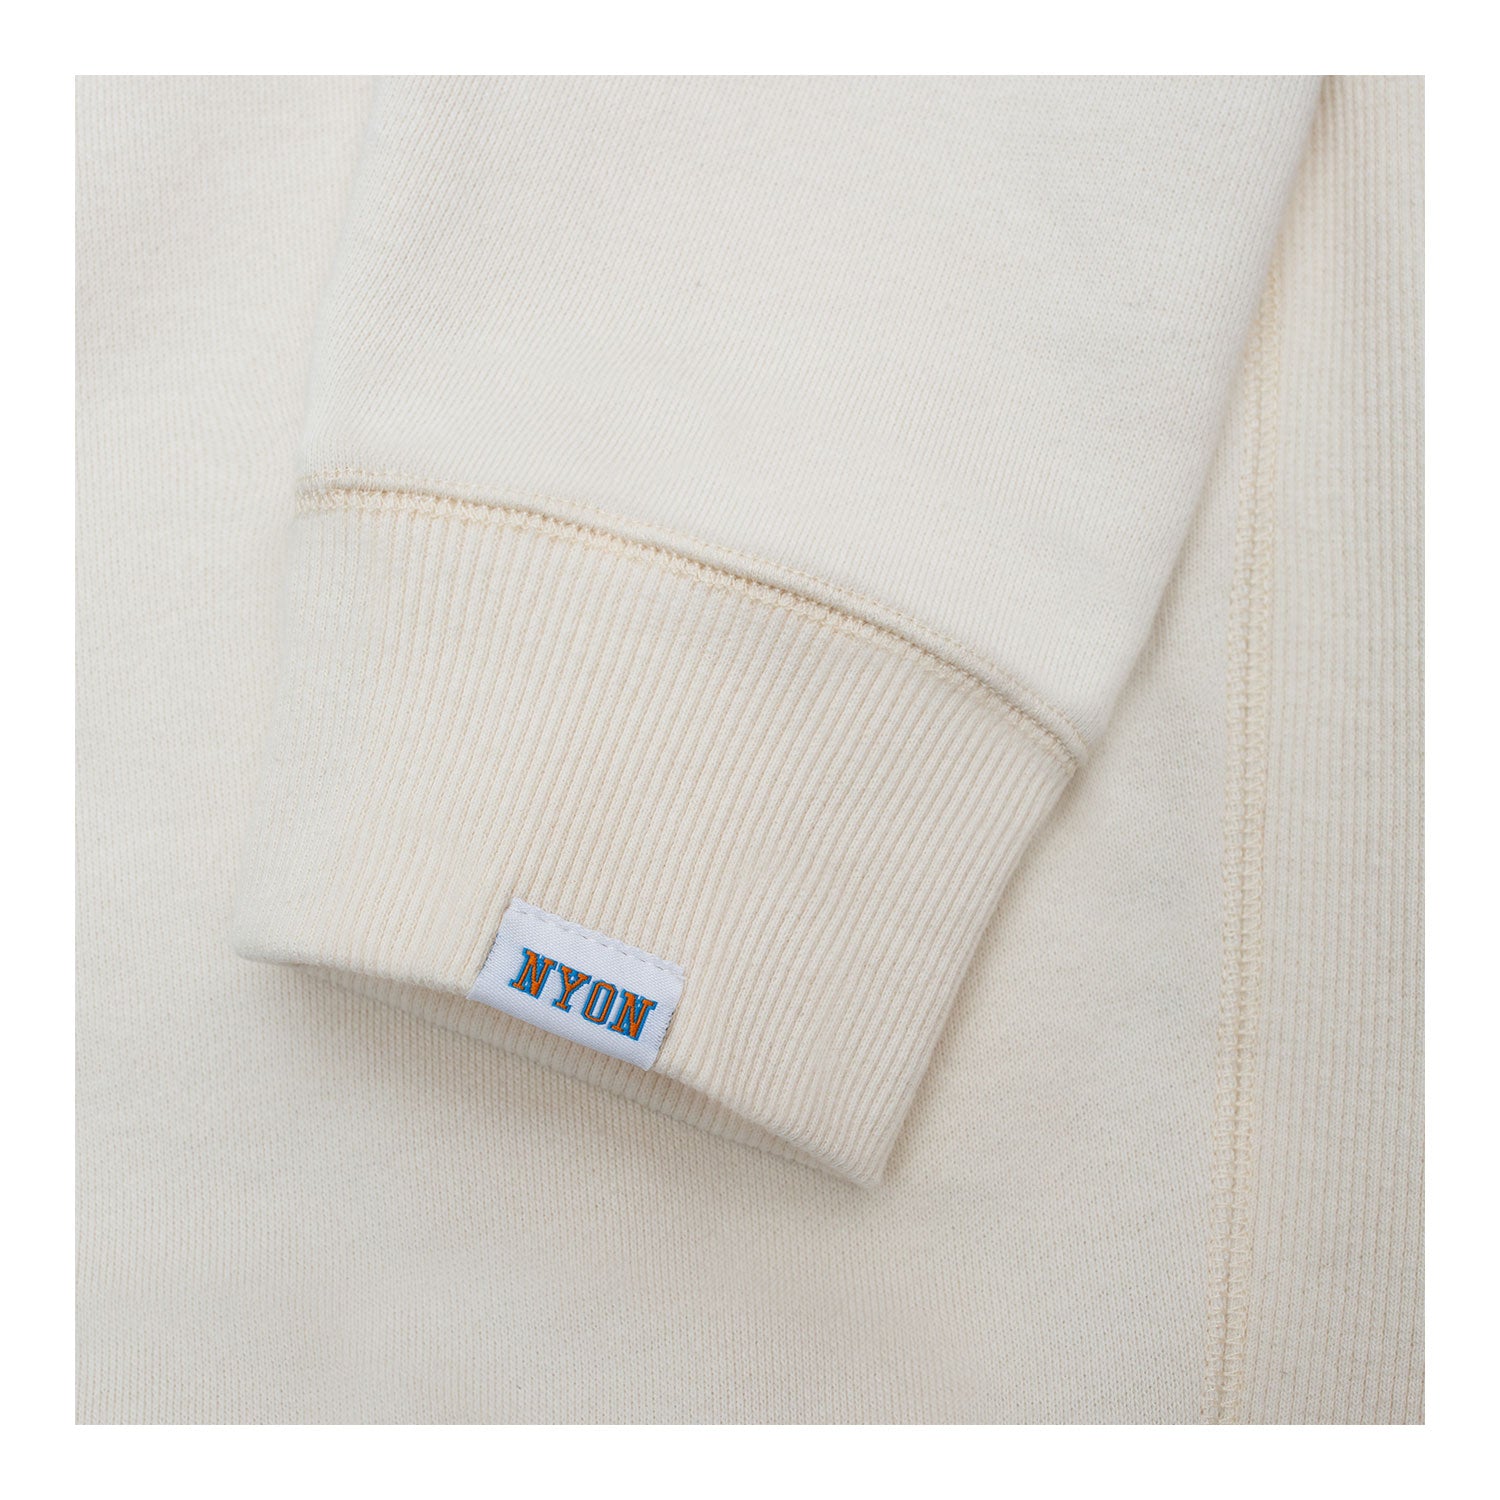 NYON x Knicks "Heyday" Crewneck - In White - Close Up Alternate Sleeve View